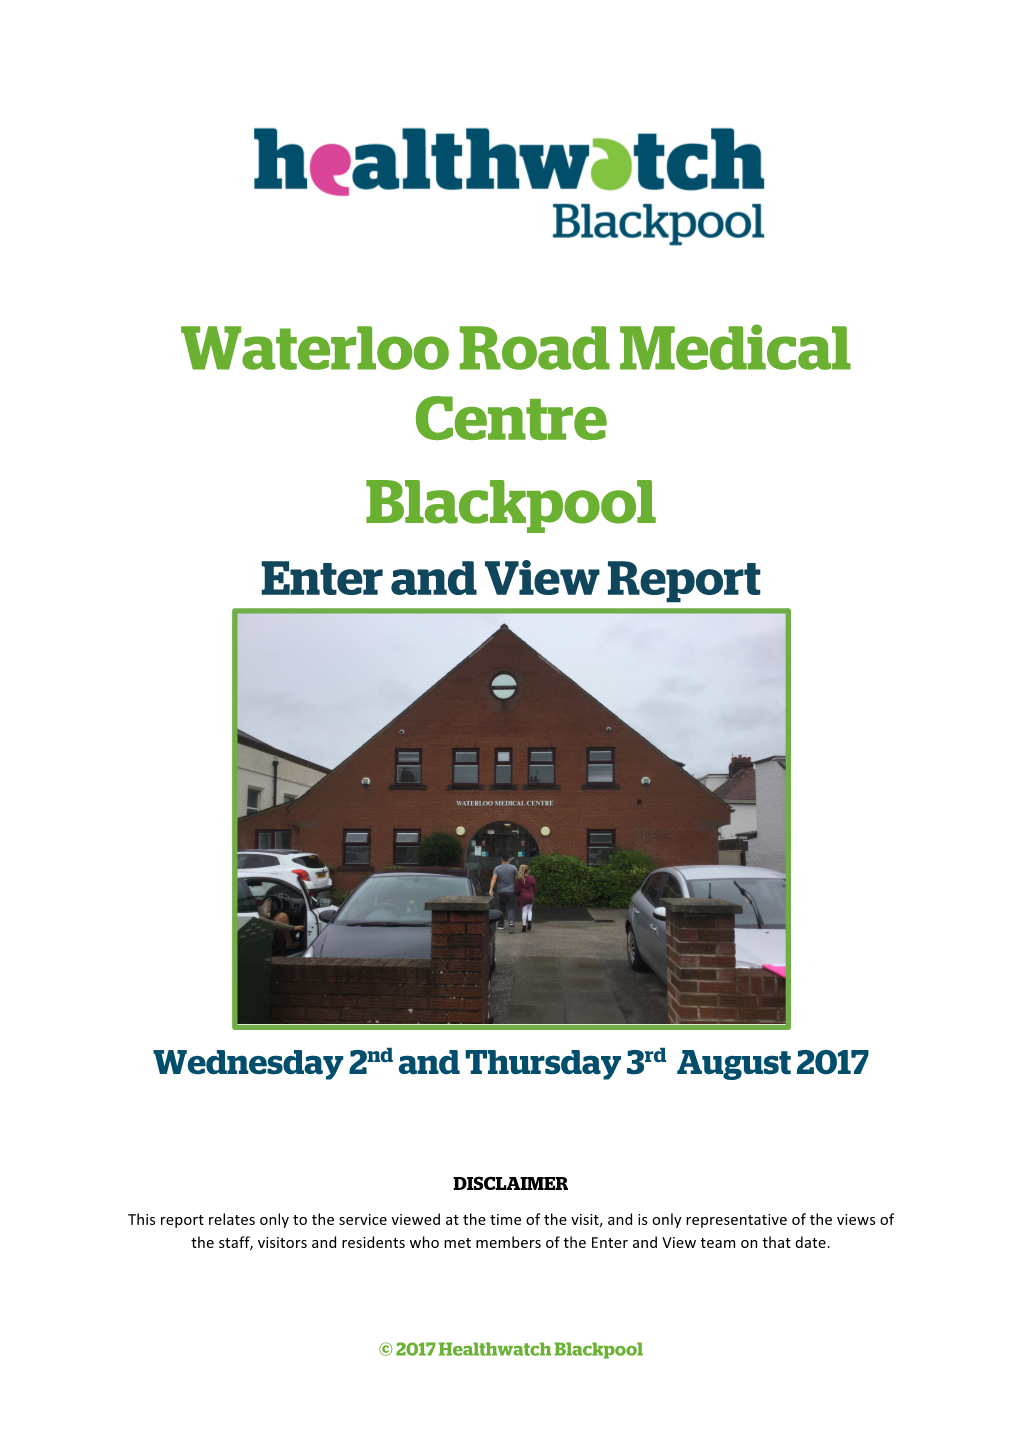 Waterloo Road Medical Centre Blackpool Enter and View Report